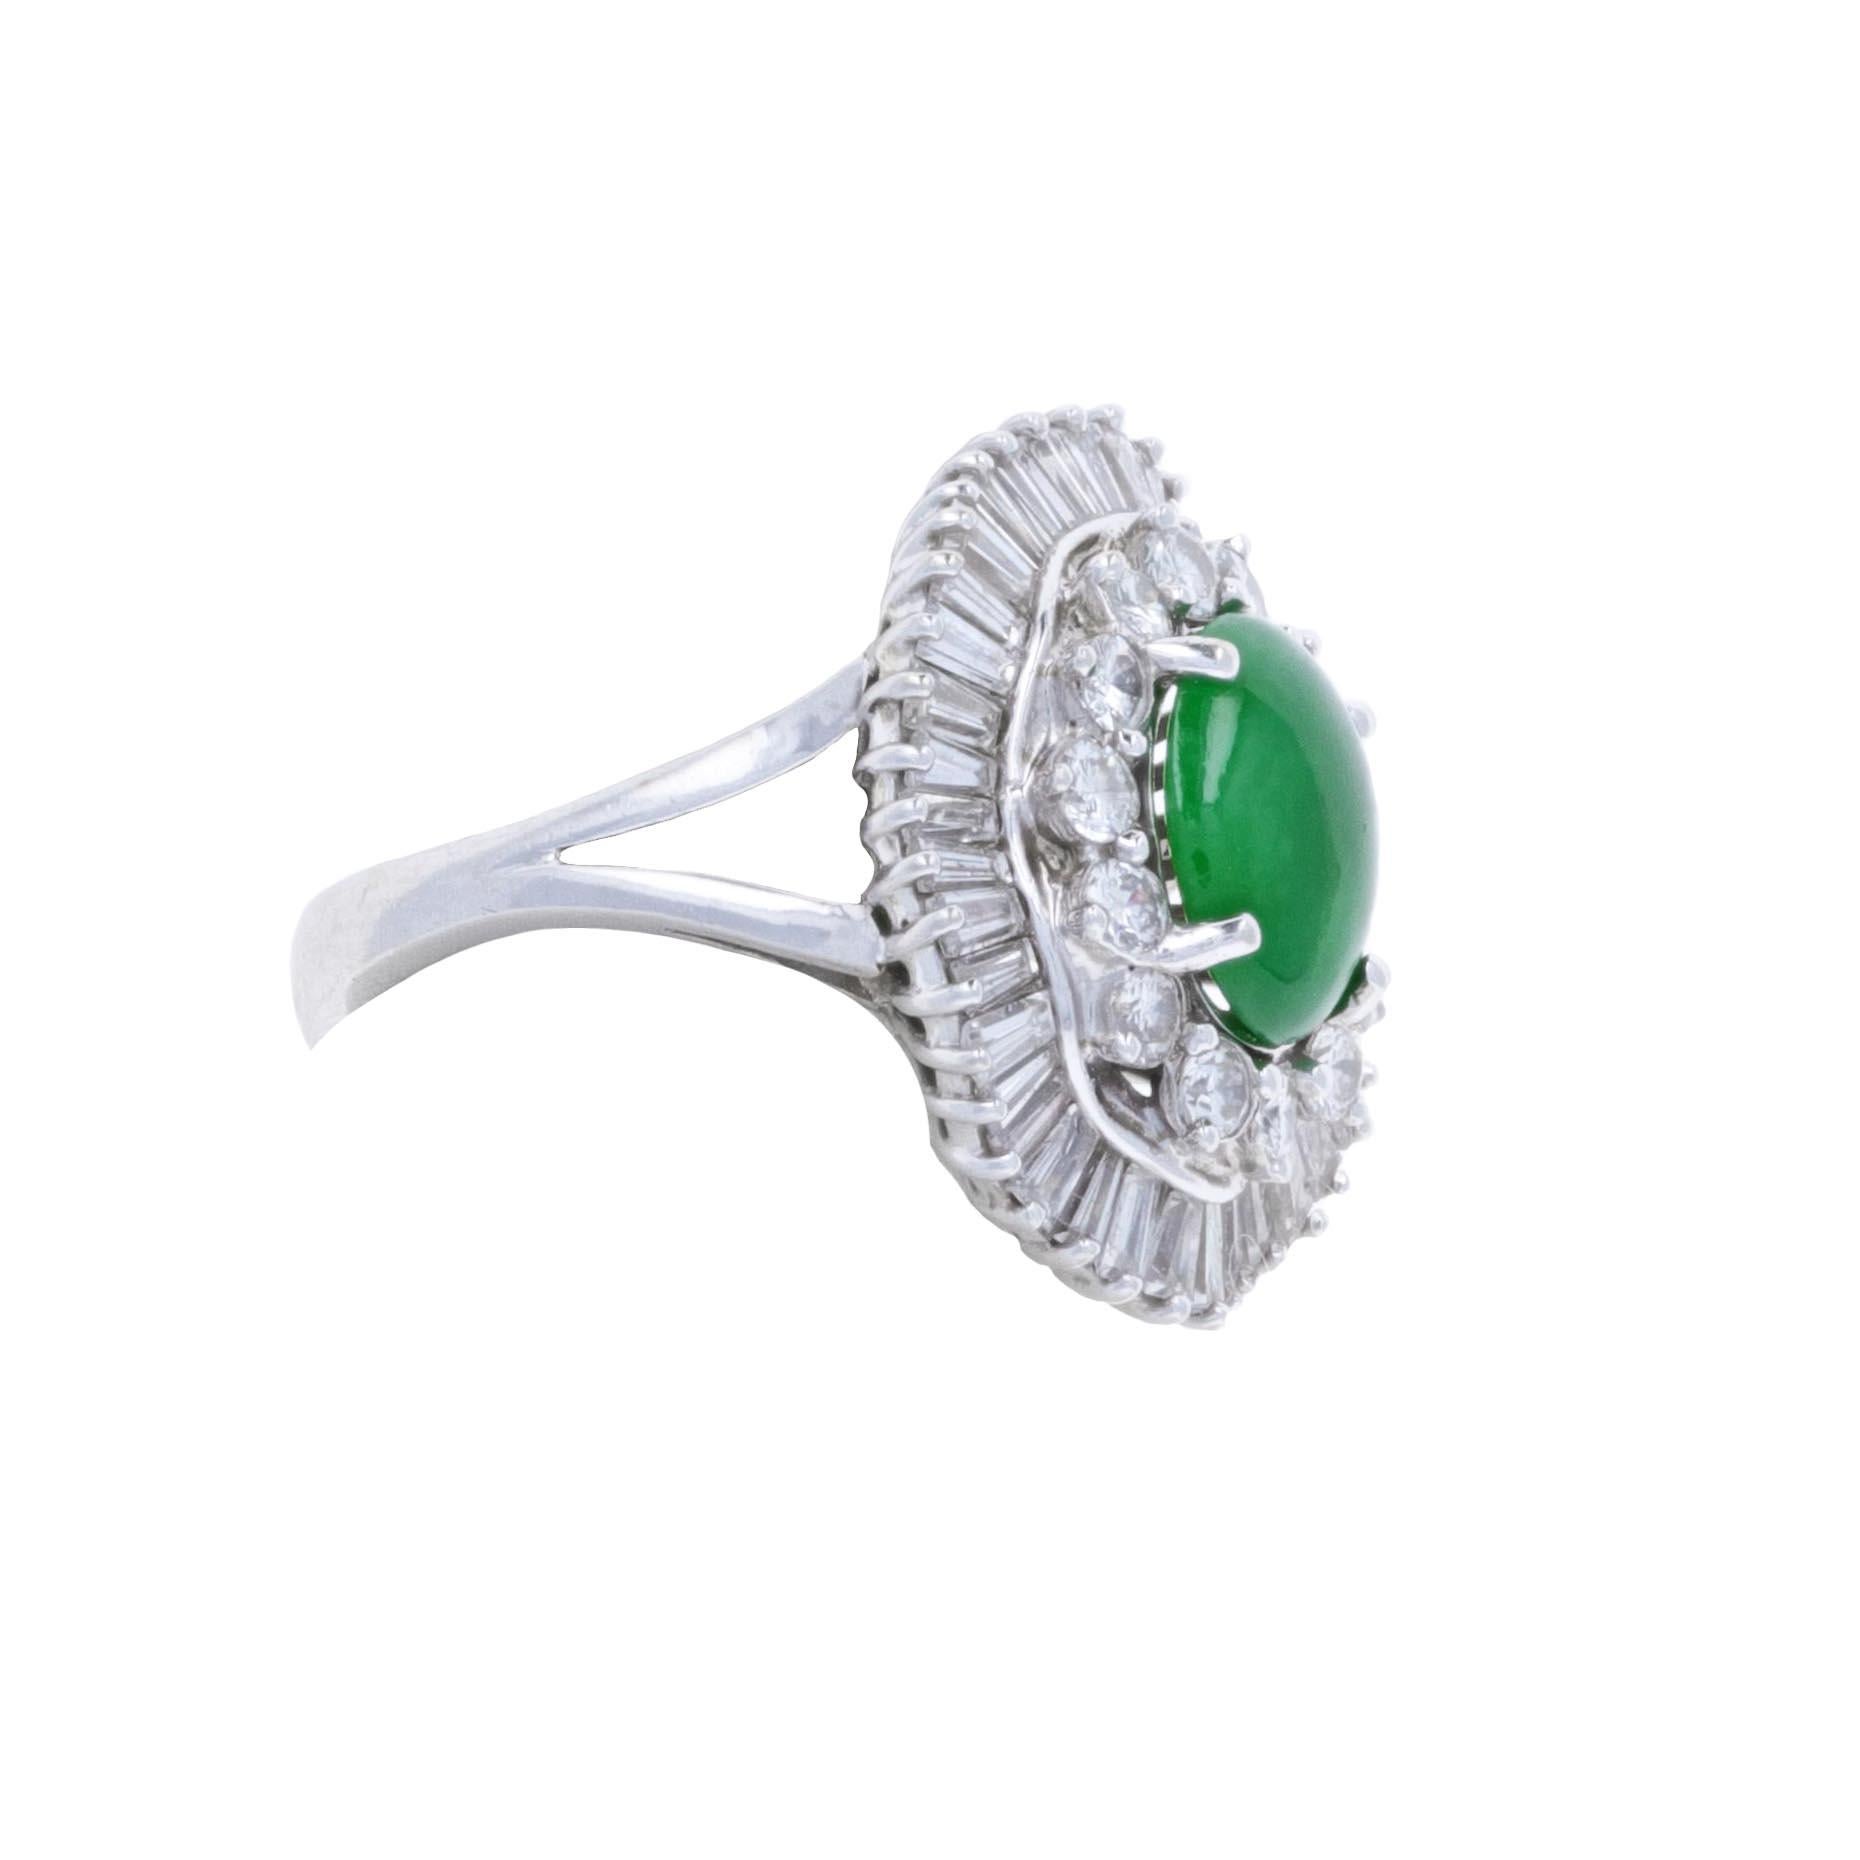 Retro Handmade Antique White Gold 3.25ct Jade and 1.25ct Diamond Cocktail Ring.  For Sale